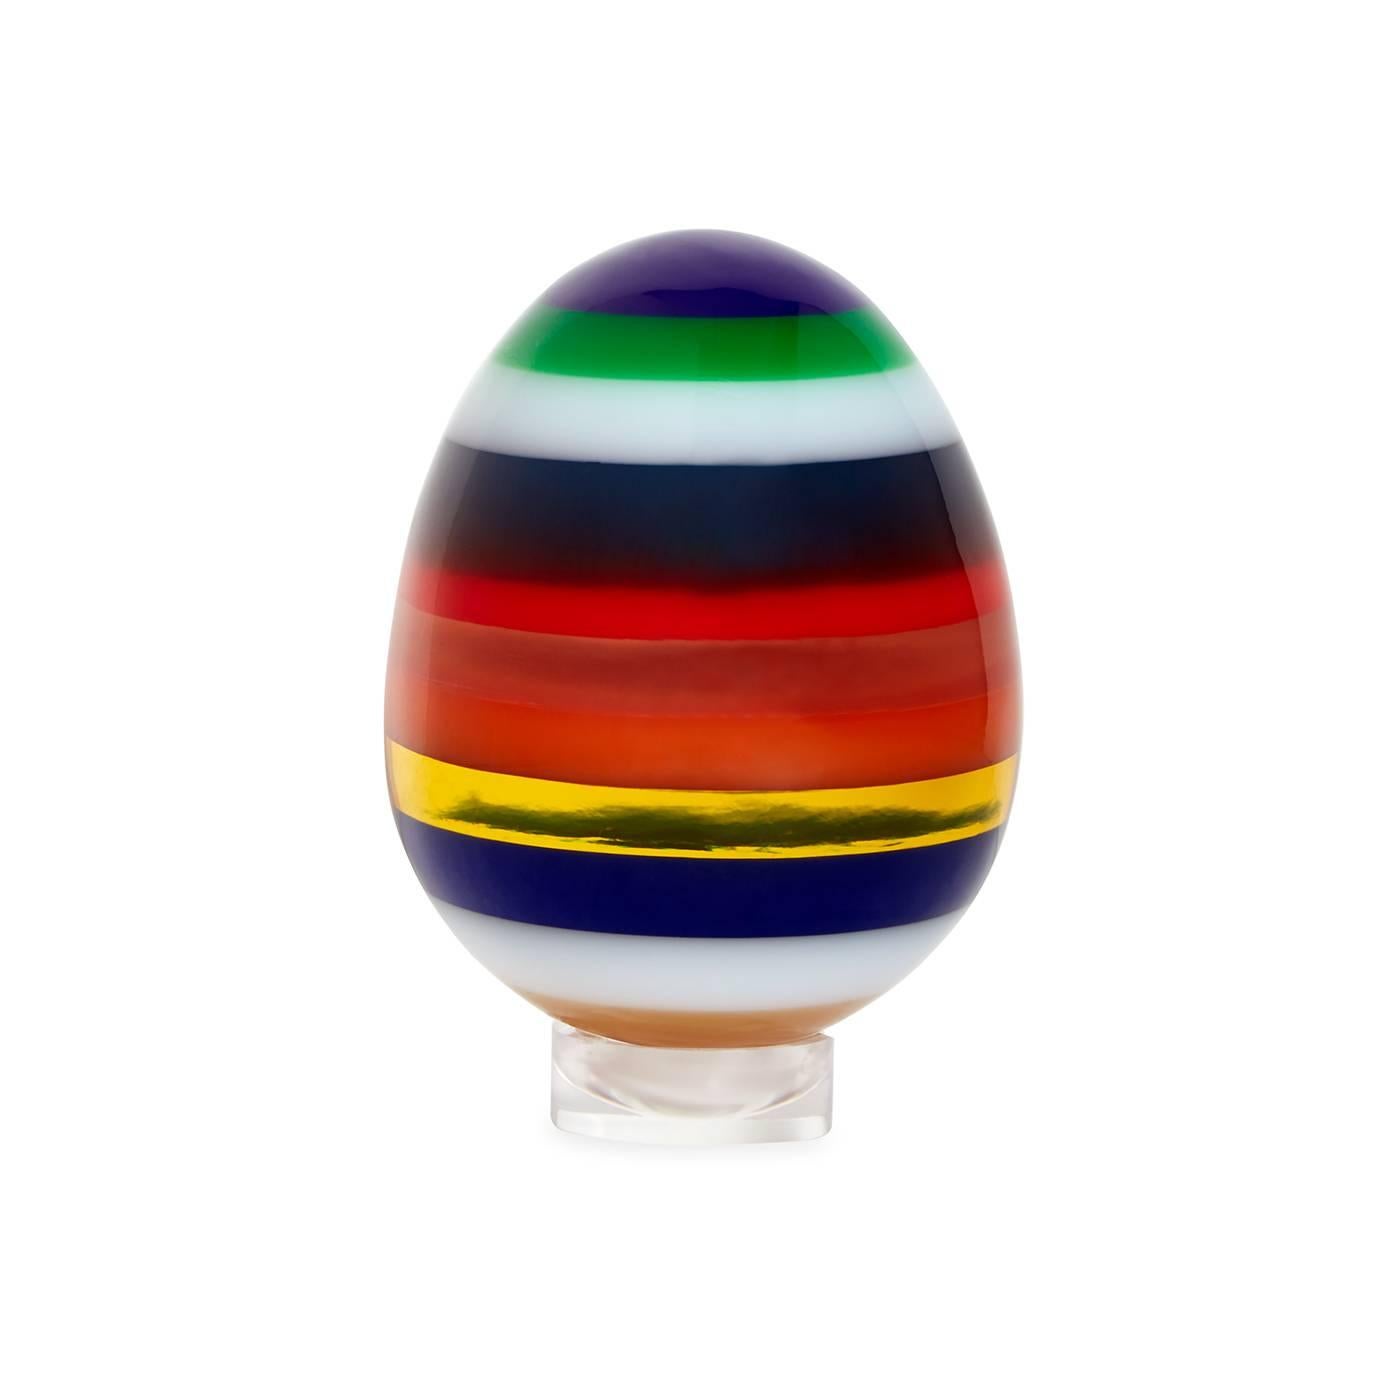 Op Art Orb. The ostrich egg on a stand has been a decorator staple since ostriches were invented, and our stacked Lucite eggs give the Classic motif a modern and trippy upgrade. 

For years JA has been tinkering with the idea of making layered